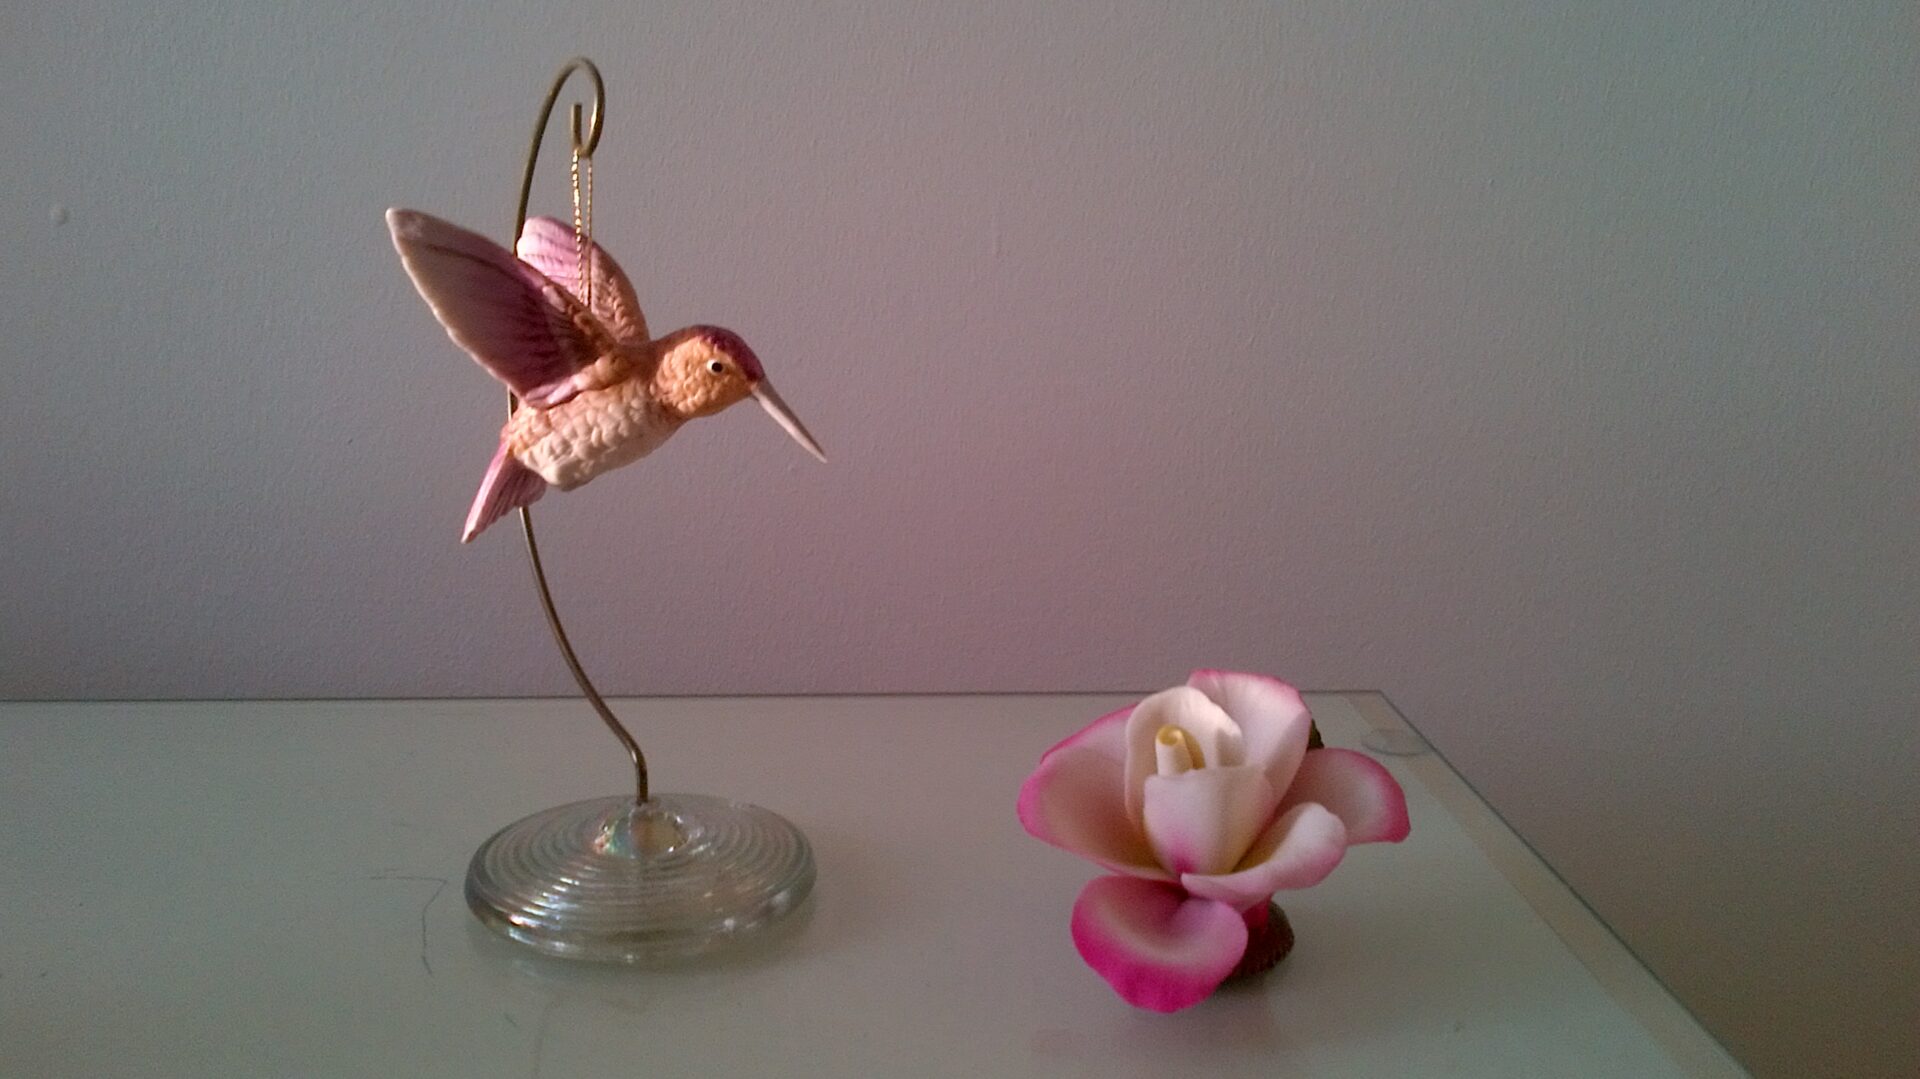 A pink flower and a hummingbird on a table.